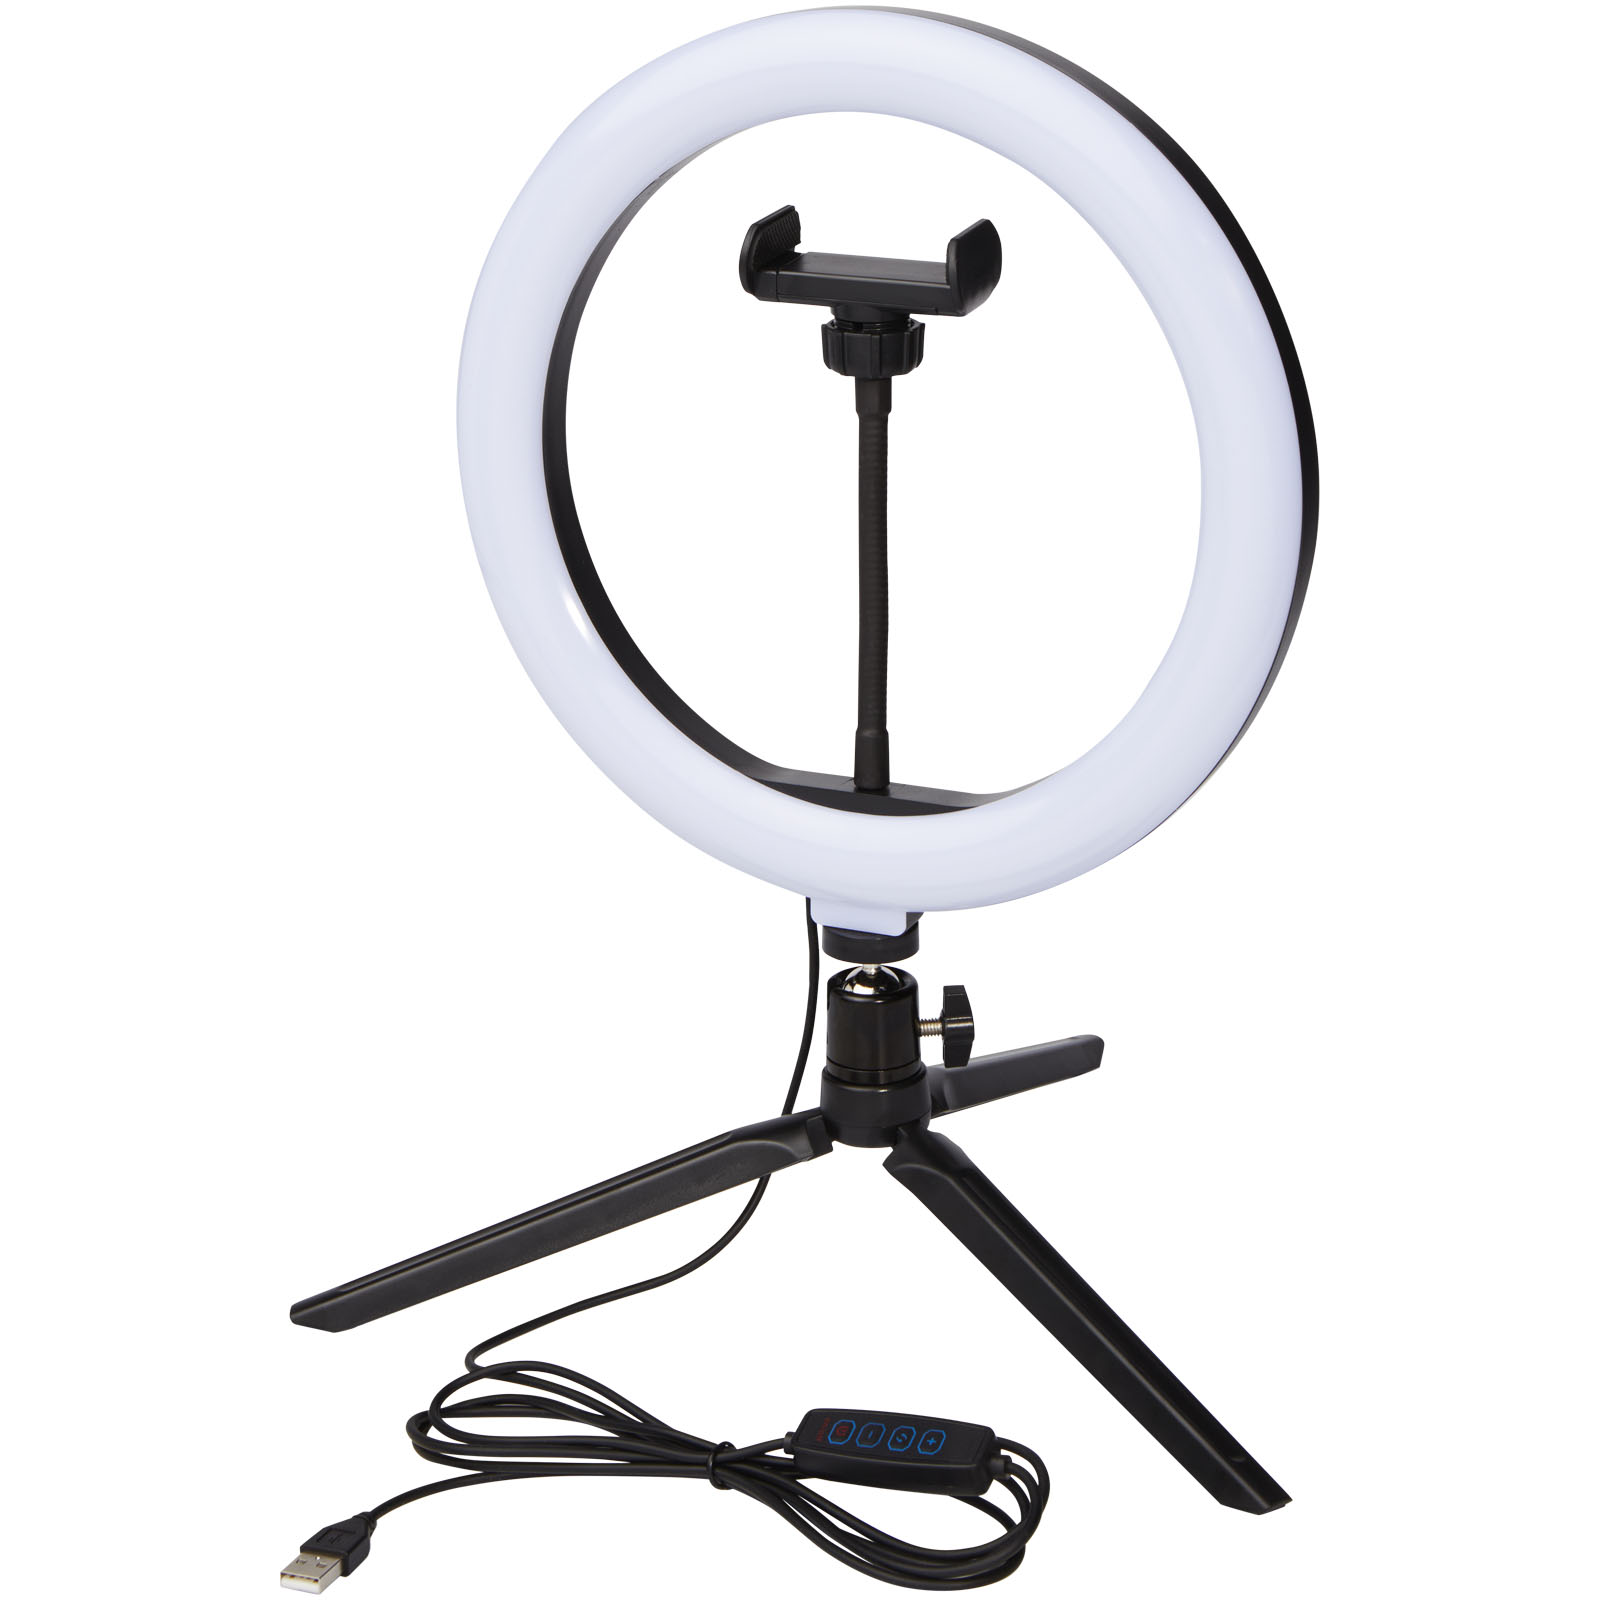 Advertising Telephone & Tablet Accessories - Studio ring light for selfies and vlogging with phone holder and tripod - 4